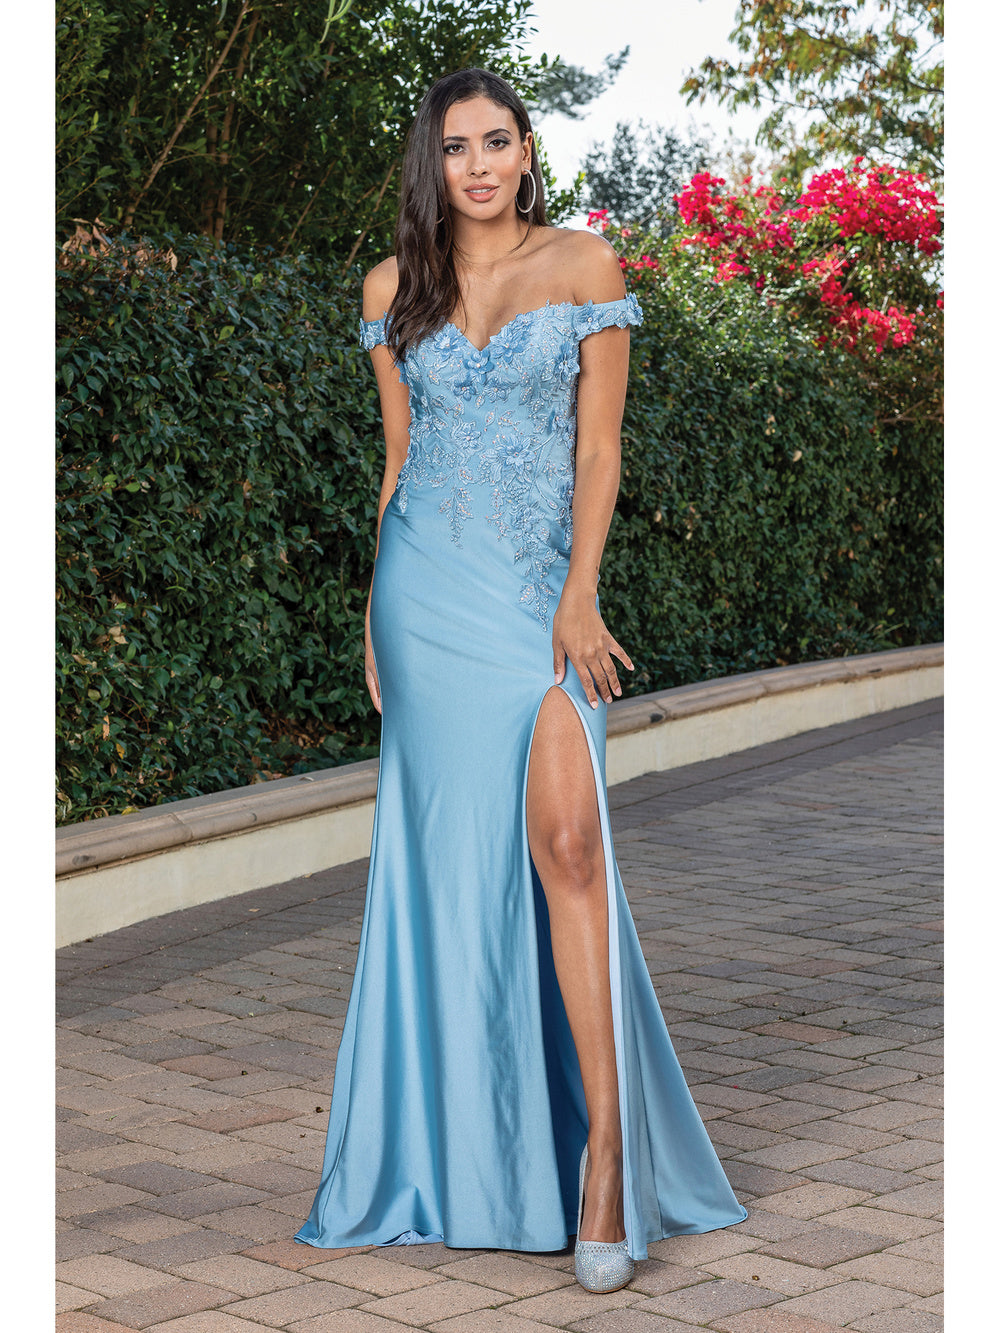 fit and flare prom dress